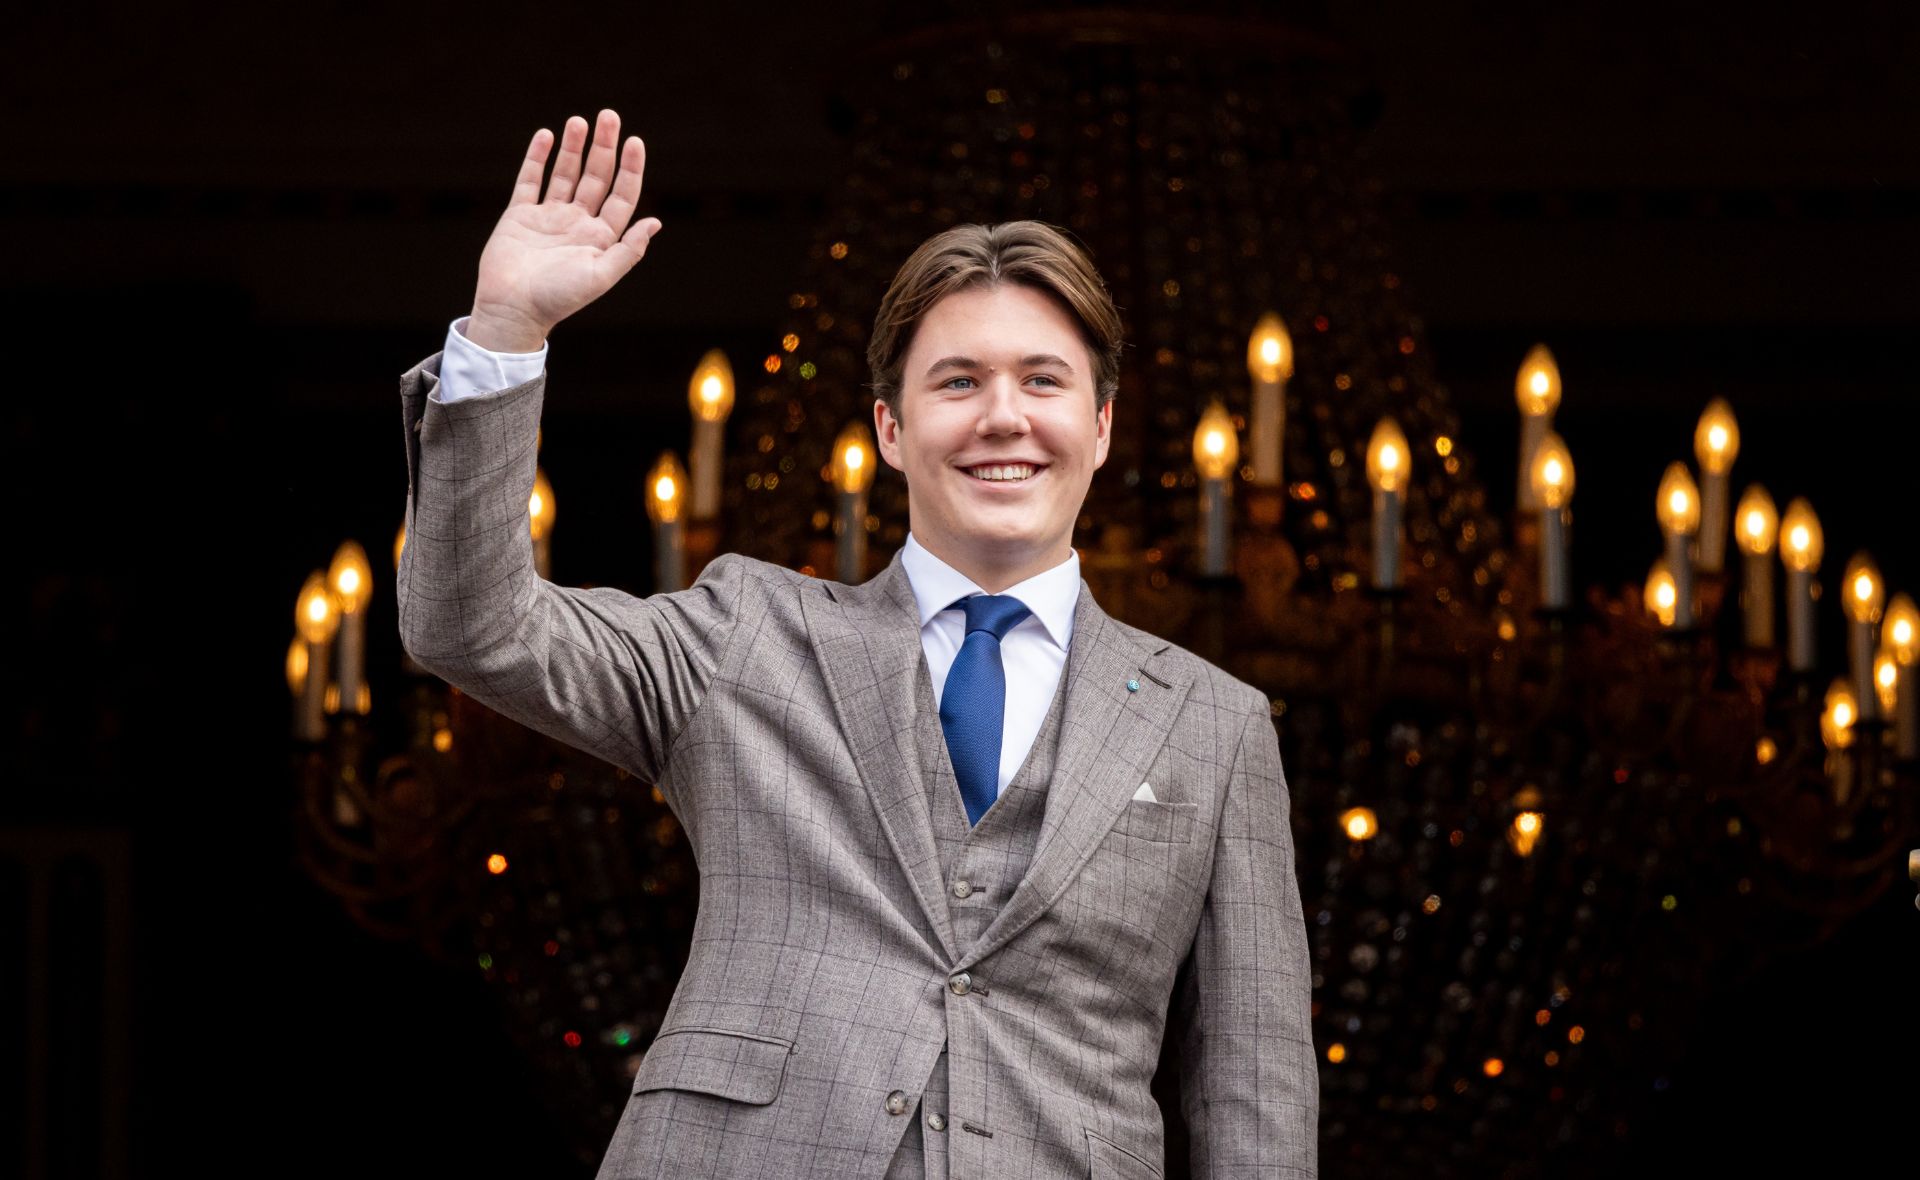 The new Danish heir: All about Prince Christian of Denmark